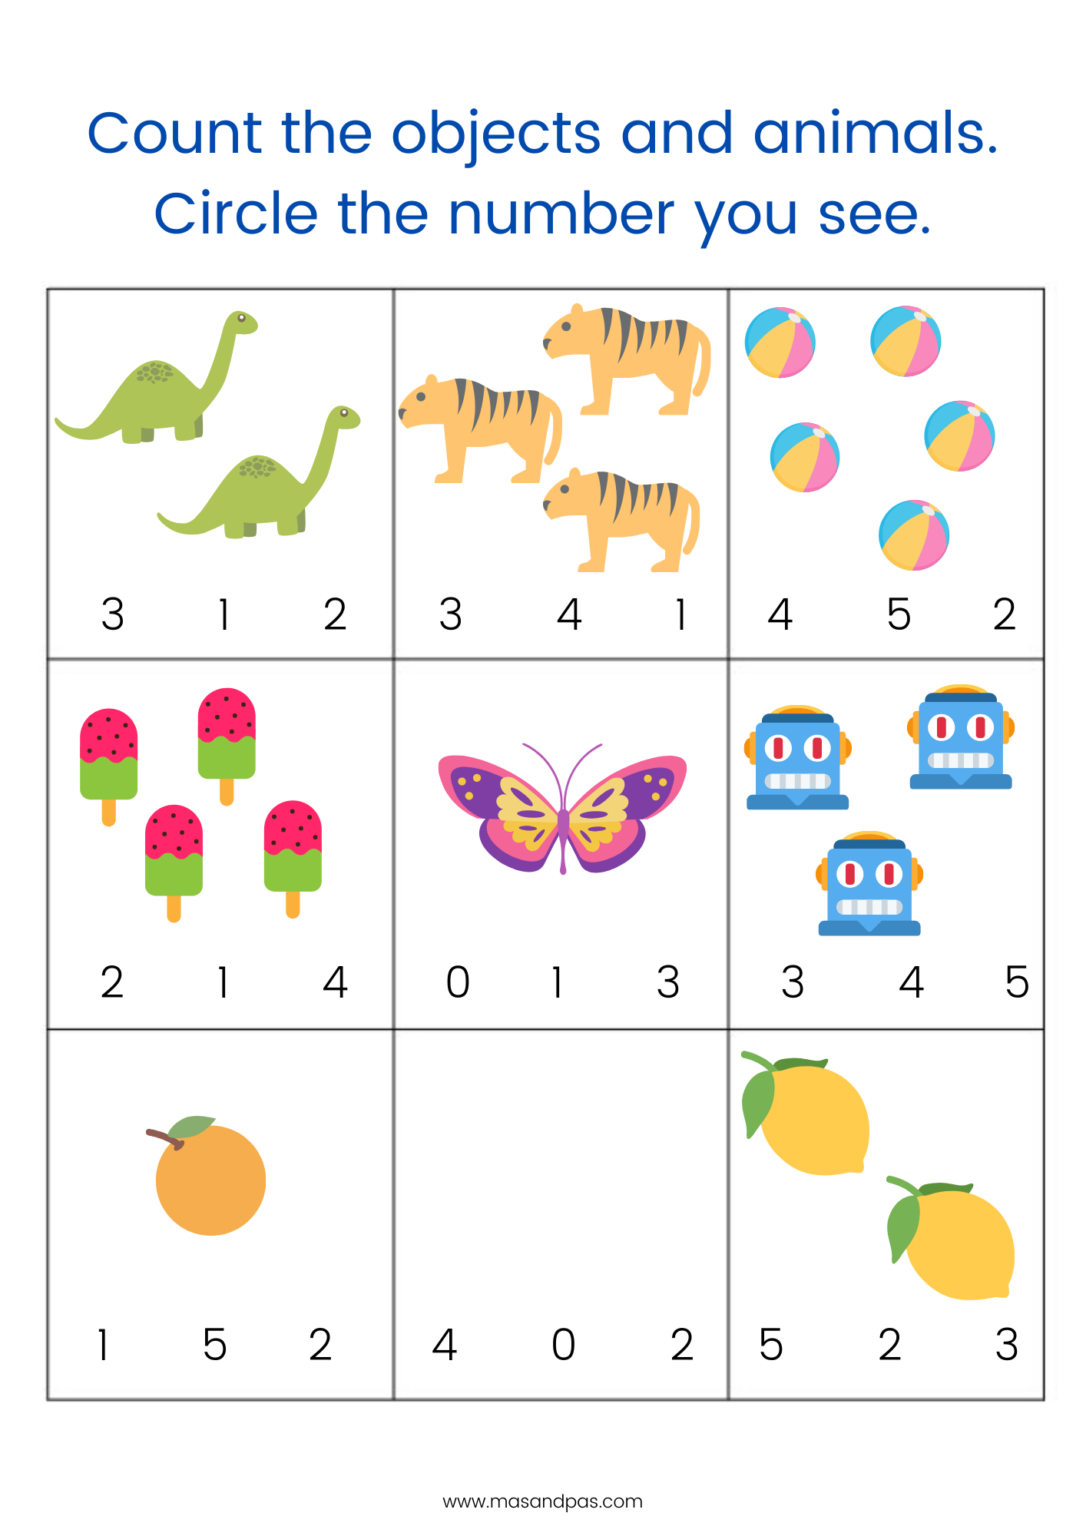 Number Kids - Counting Numbers & Math Games download the last version for iphone